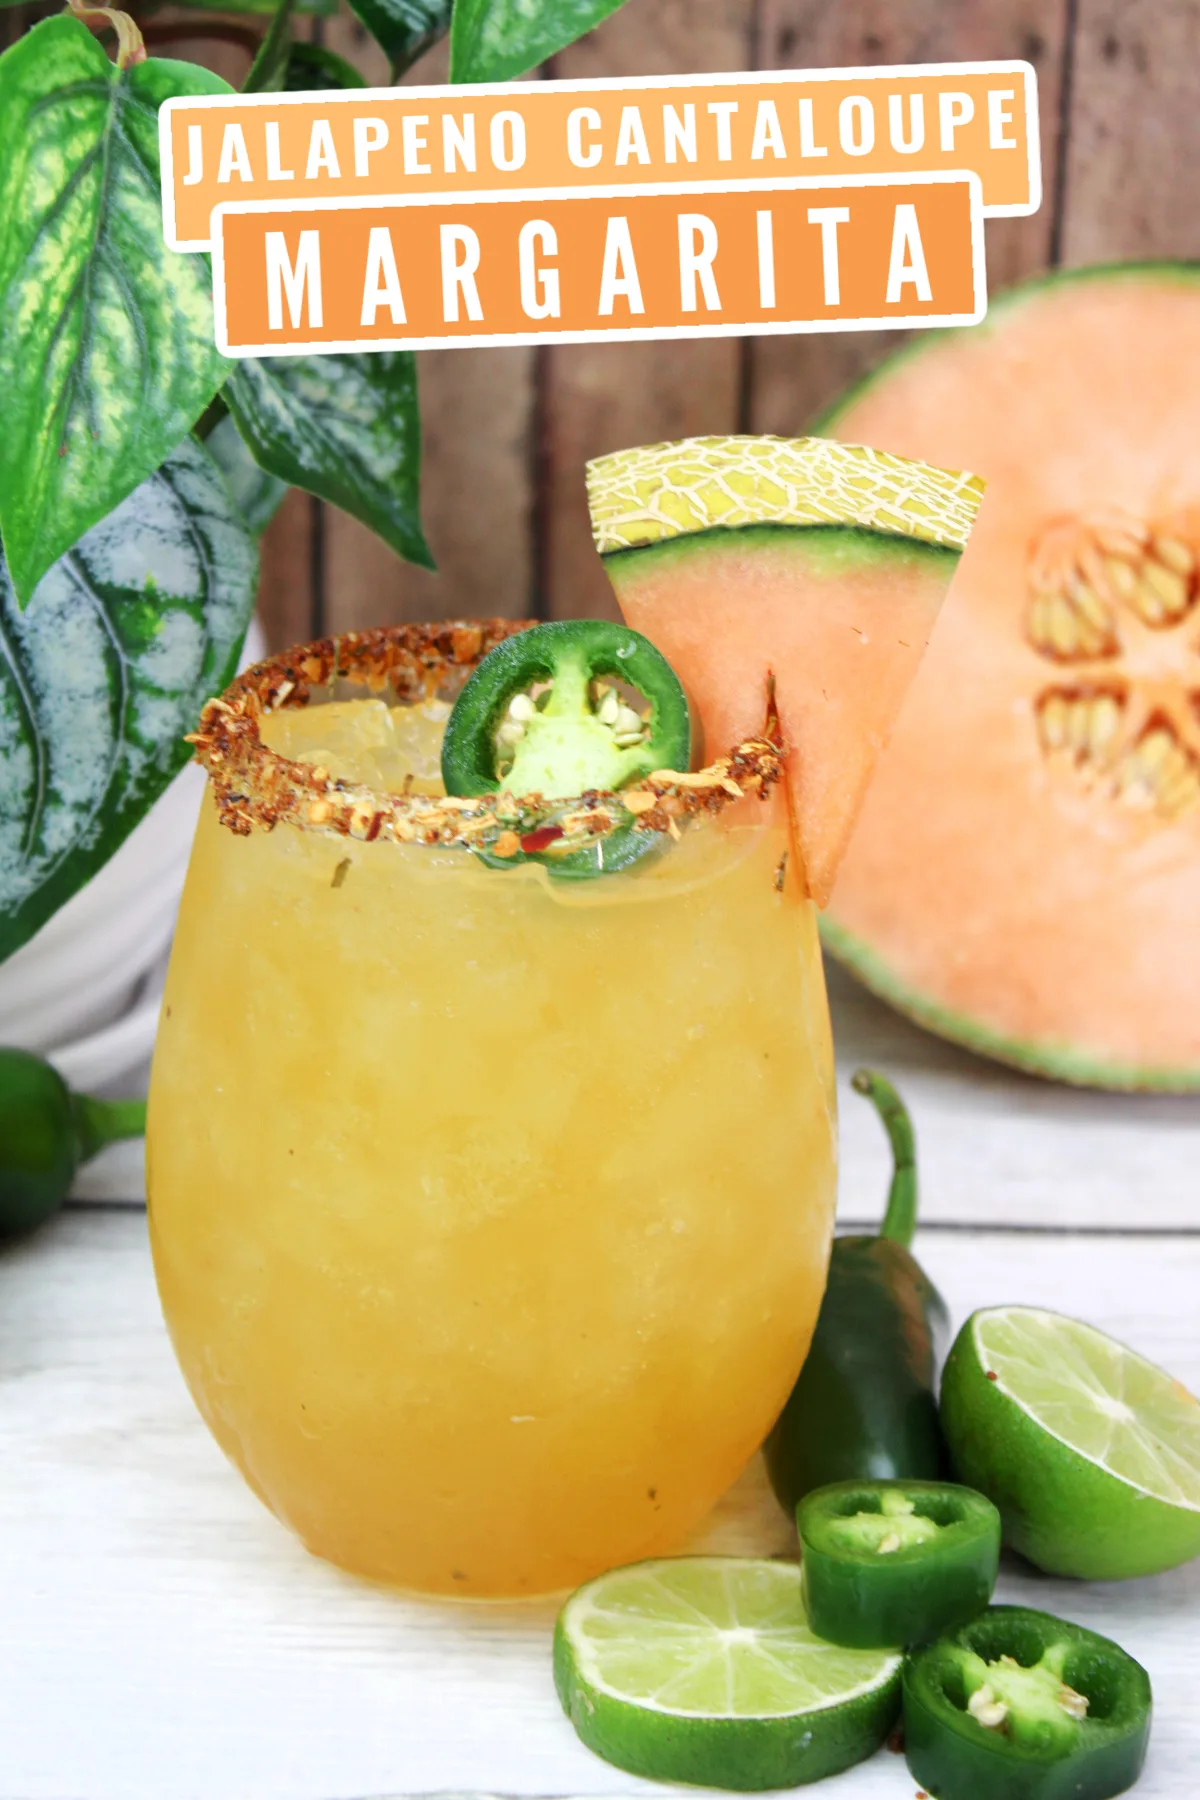 Take your margarita to the next level with this Jalapeno Cantaloupe Margarita recipe featuring refreshing cantaloupe with a spicy twist.